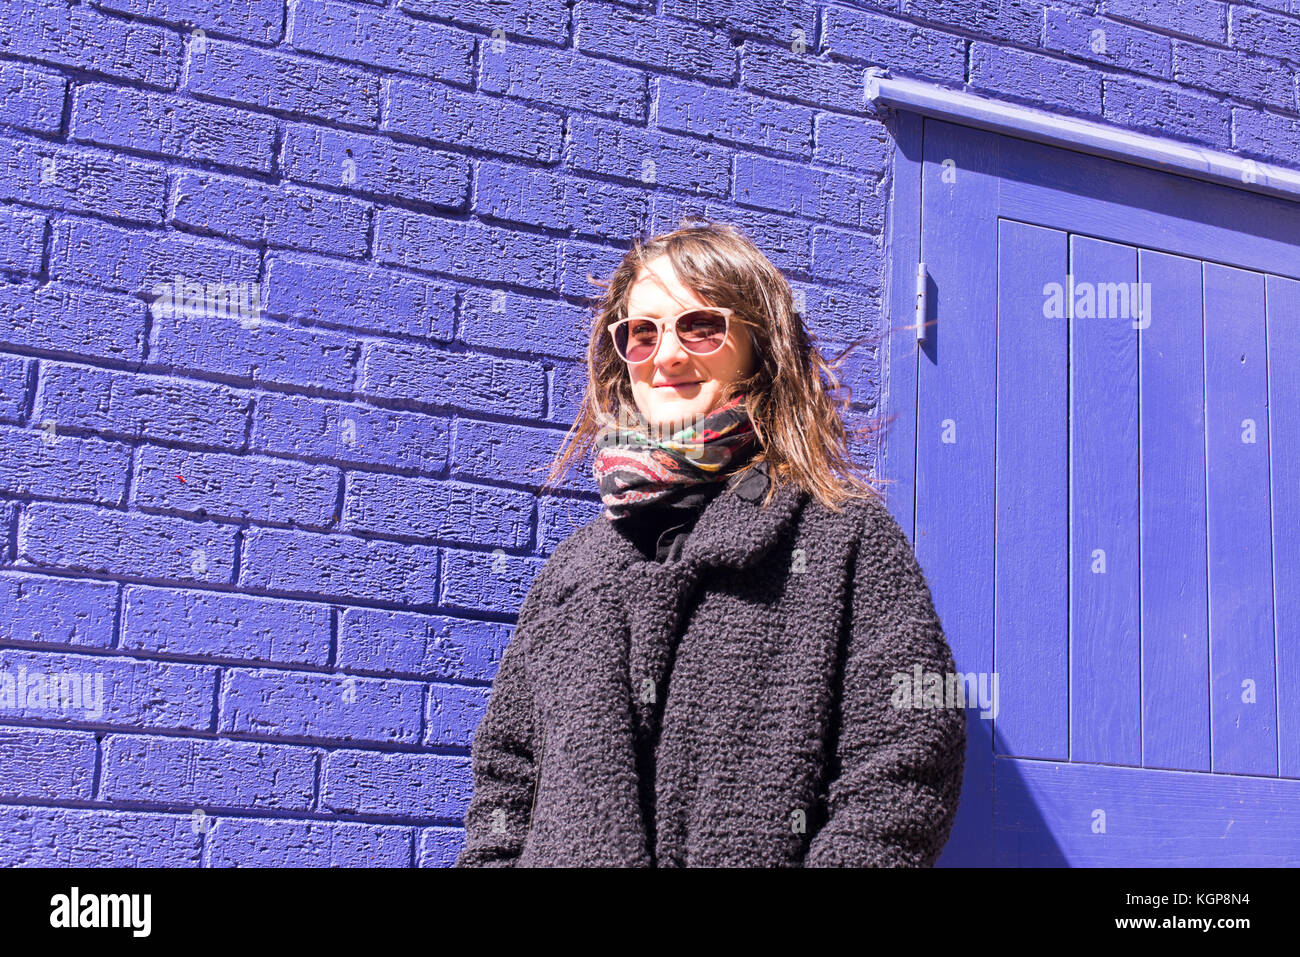 A woman wearing sunglasses standing in front of a wall photo